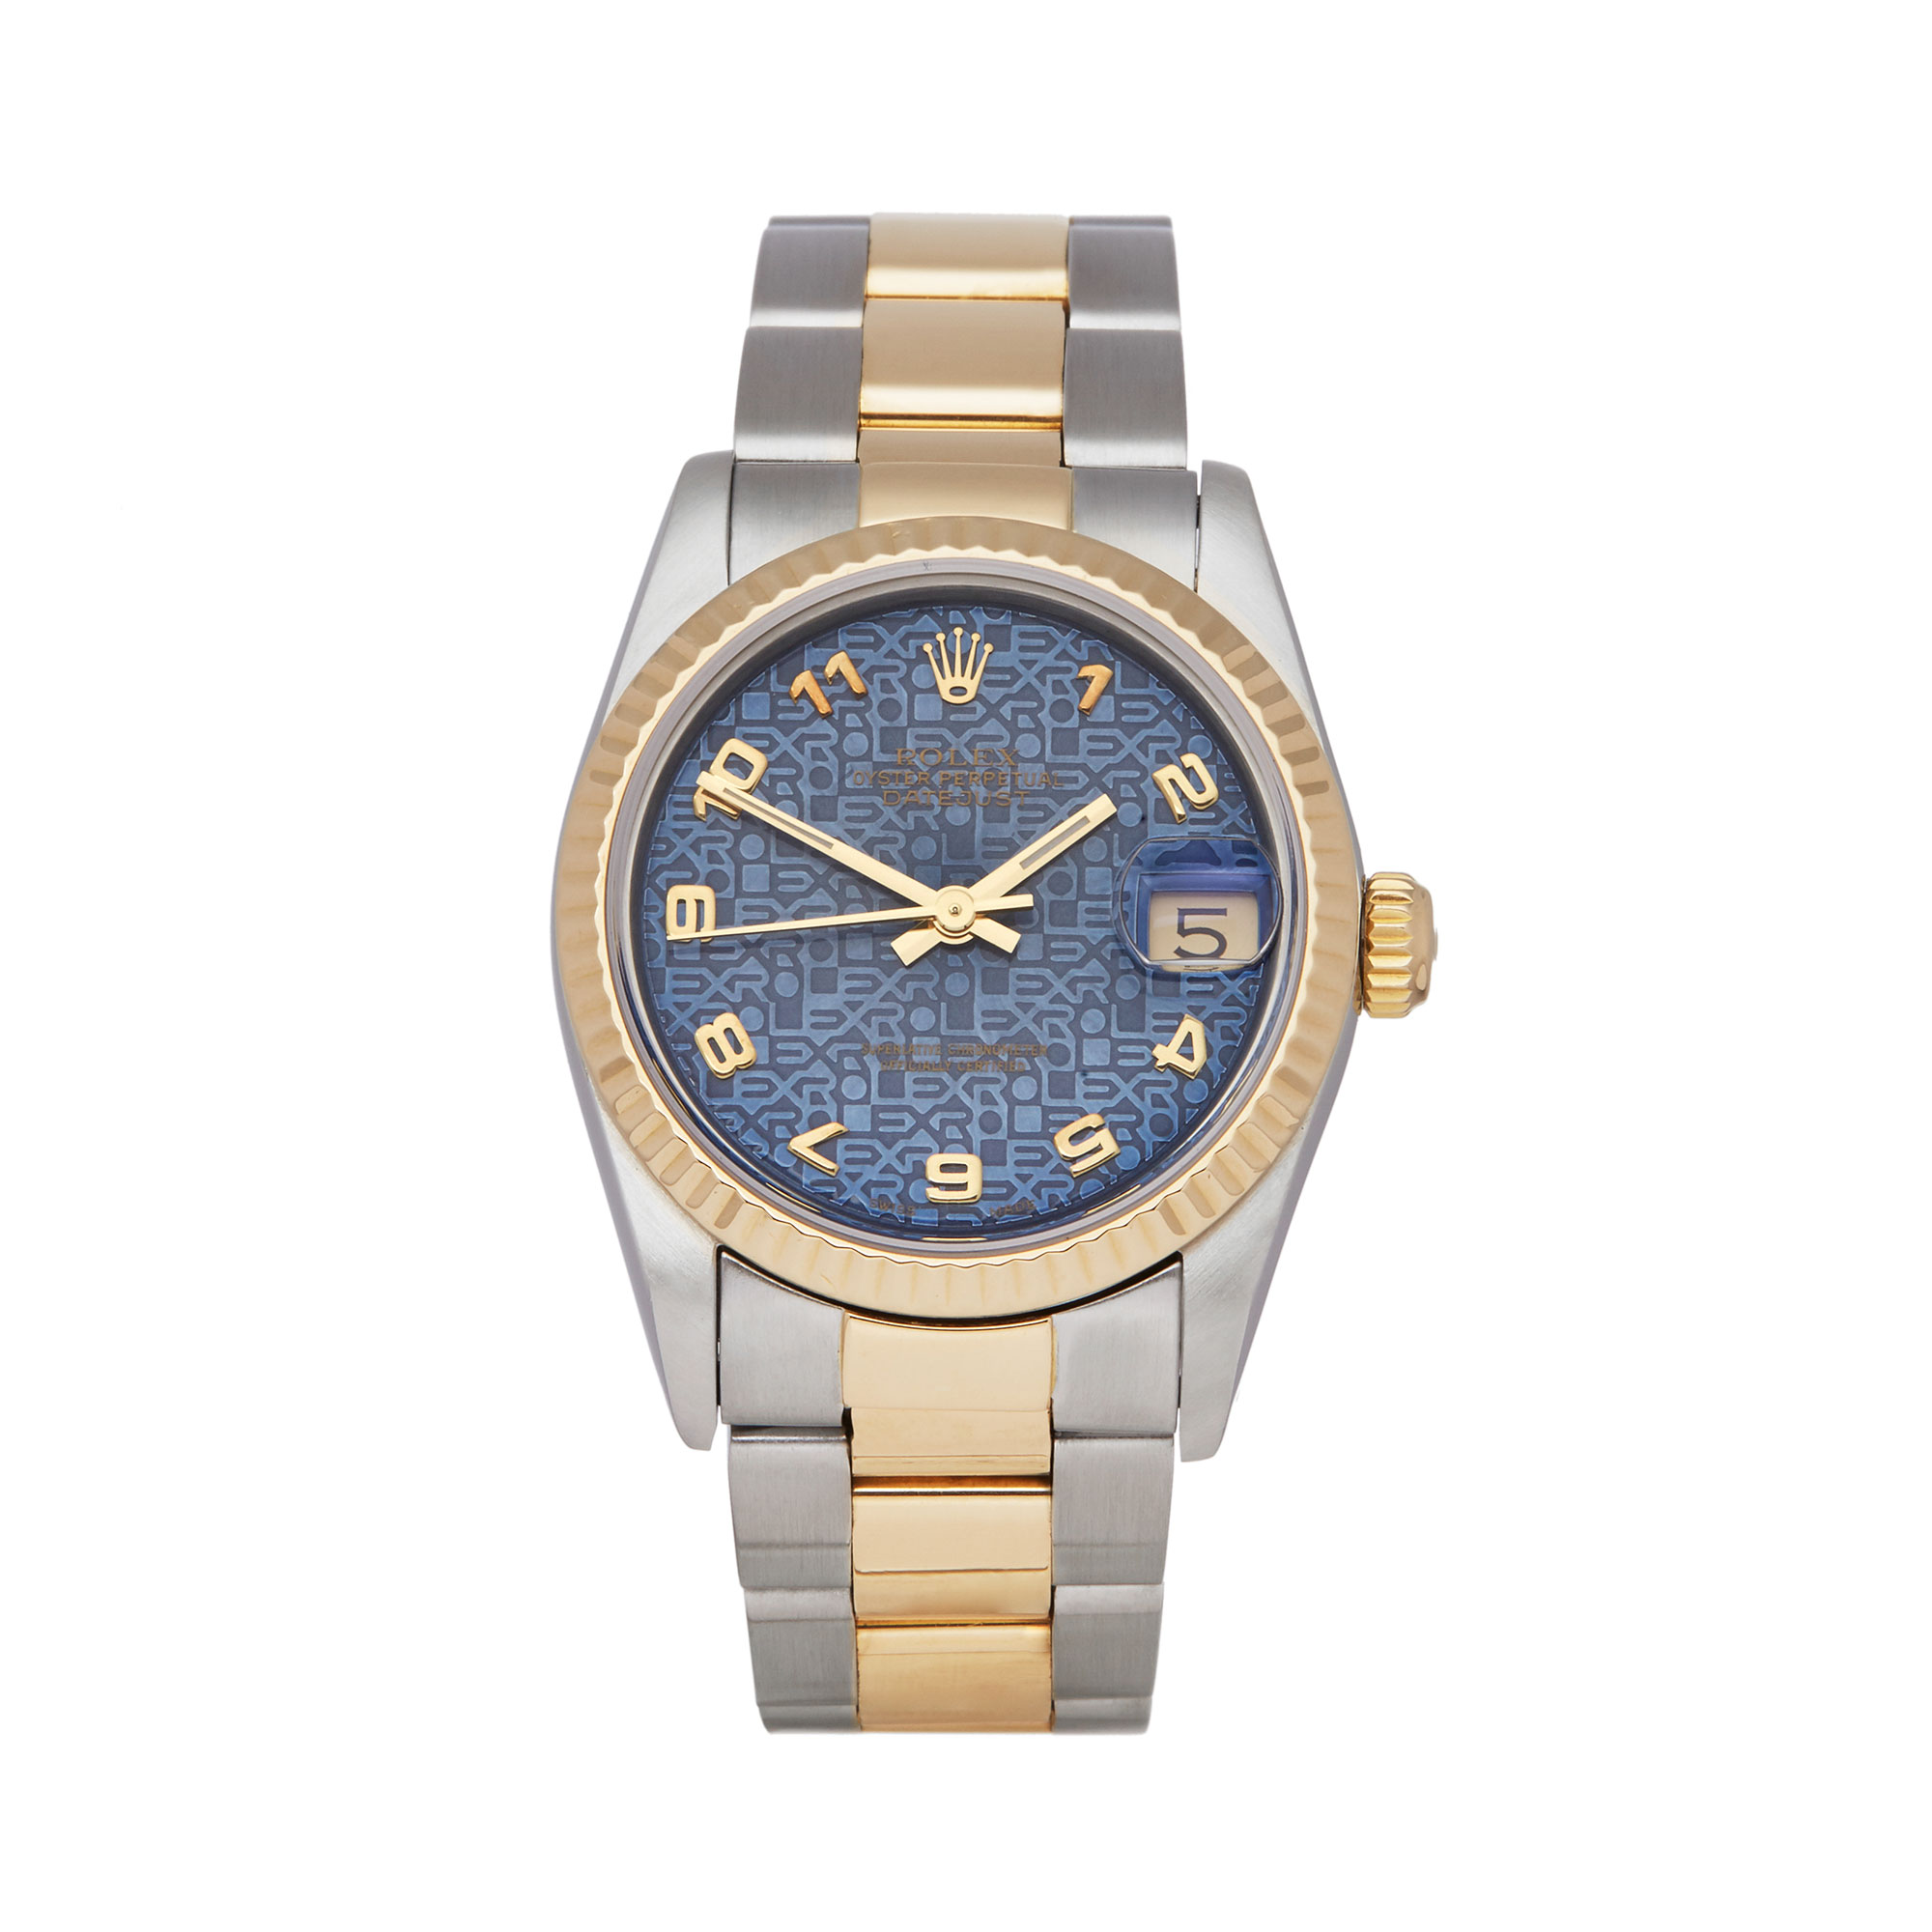 Rolex Datejust 31 68273 Ladies Stainless Steel & Yellow Gold Jubilee Dial Watch - Image 8 of 8